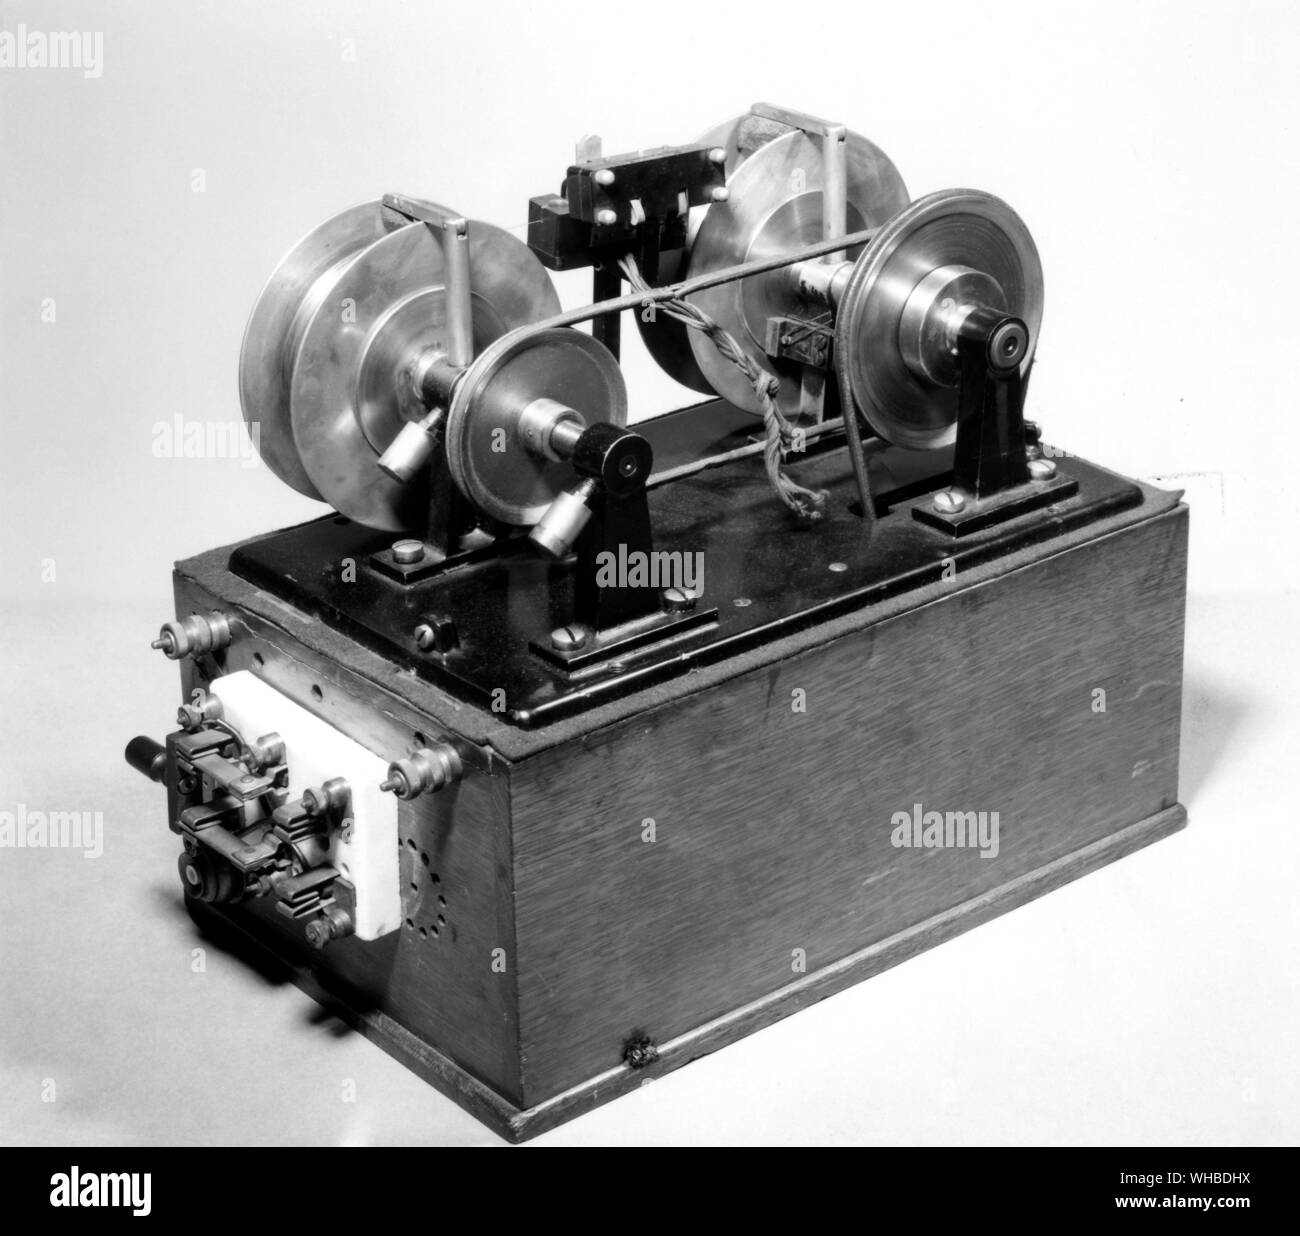 Telegraphone - The audio tape recorder was invented just a few years after the phonograph, but most people would never hear about it until the 1950s. In the late 1870s, an engineer from New Jersey named Oberlin Smith came up with the idea of a 'magnetic' recorder after seeing Edison’s work on the phonograph and the telephone. By using a telephone, an electromagnet, and a long piece of wire, he was able to capture sound as a region of varying magnetism rather than as a wavy groove. Smith never demonstrated the recorder, but in the early 1890s the Danish inventor Valdemar Poulsen either read Stock Photo